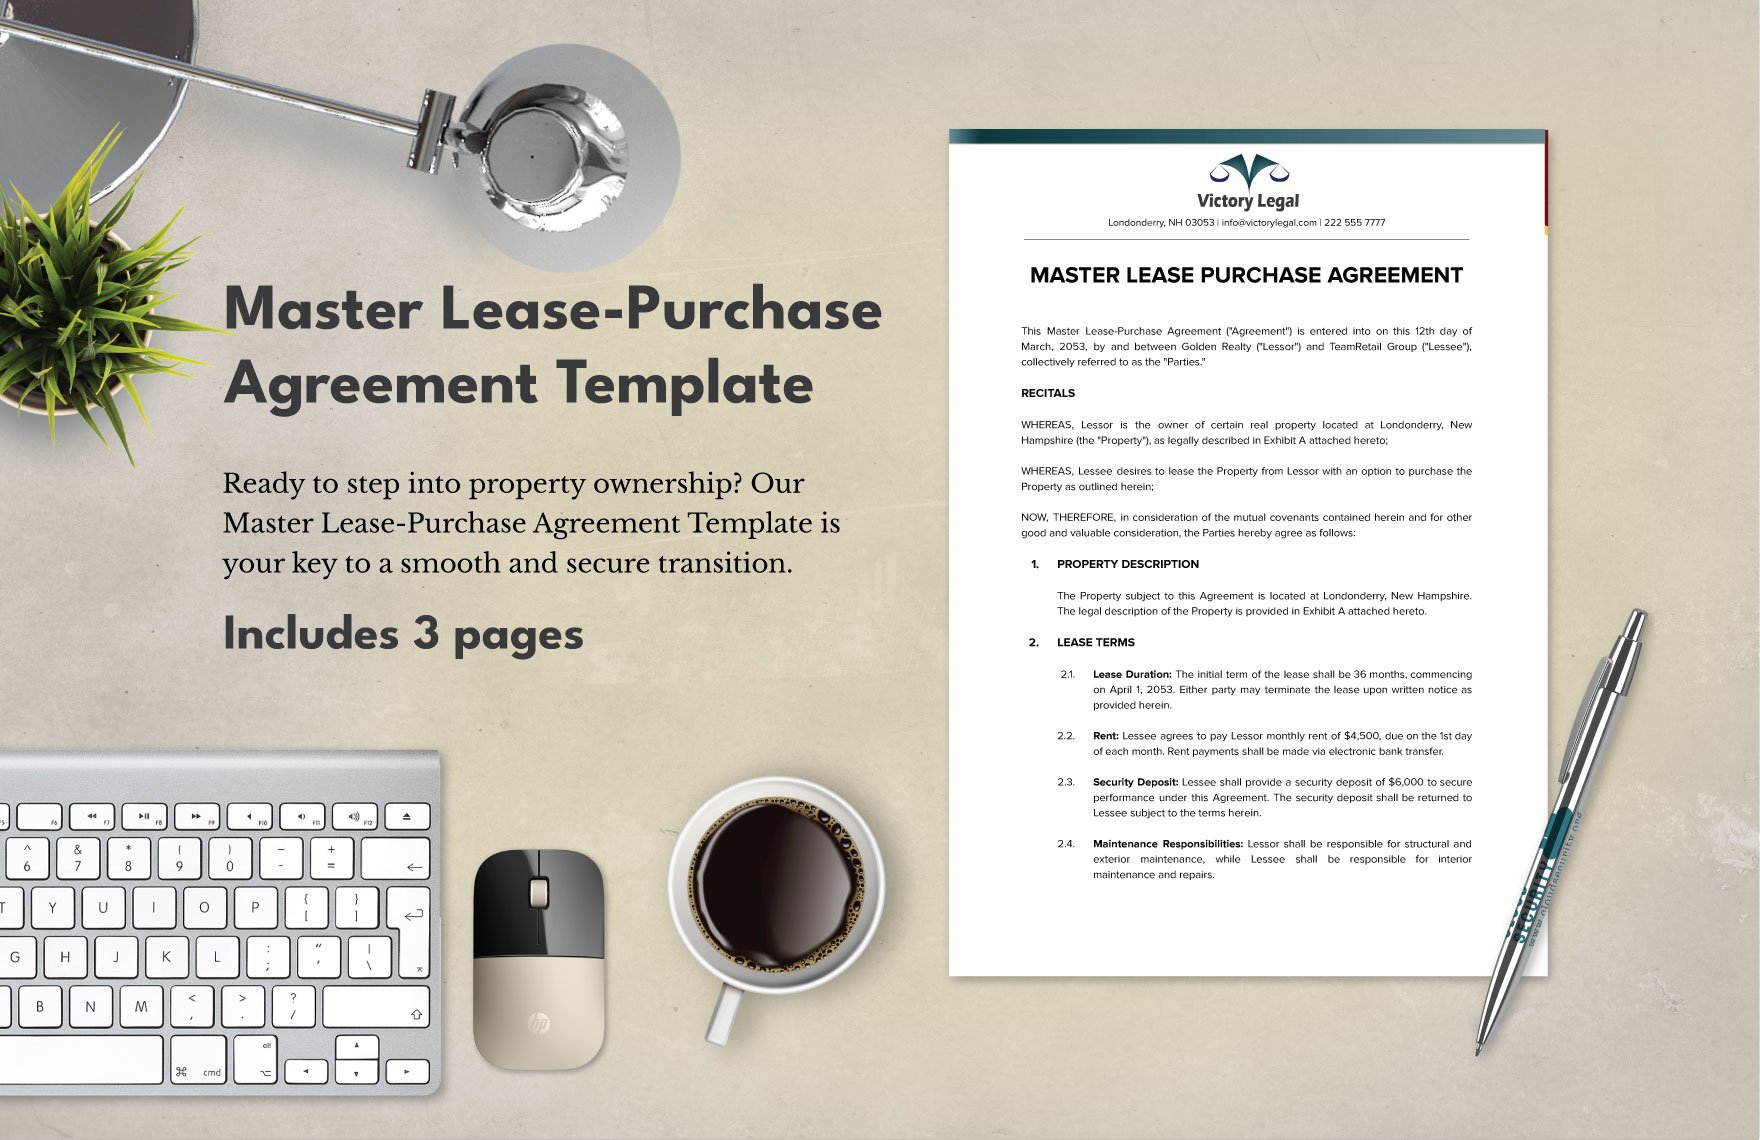 Master Lease-Purchase Agreement Template